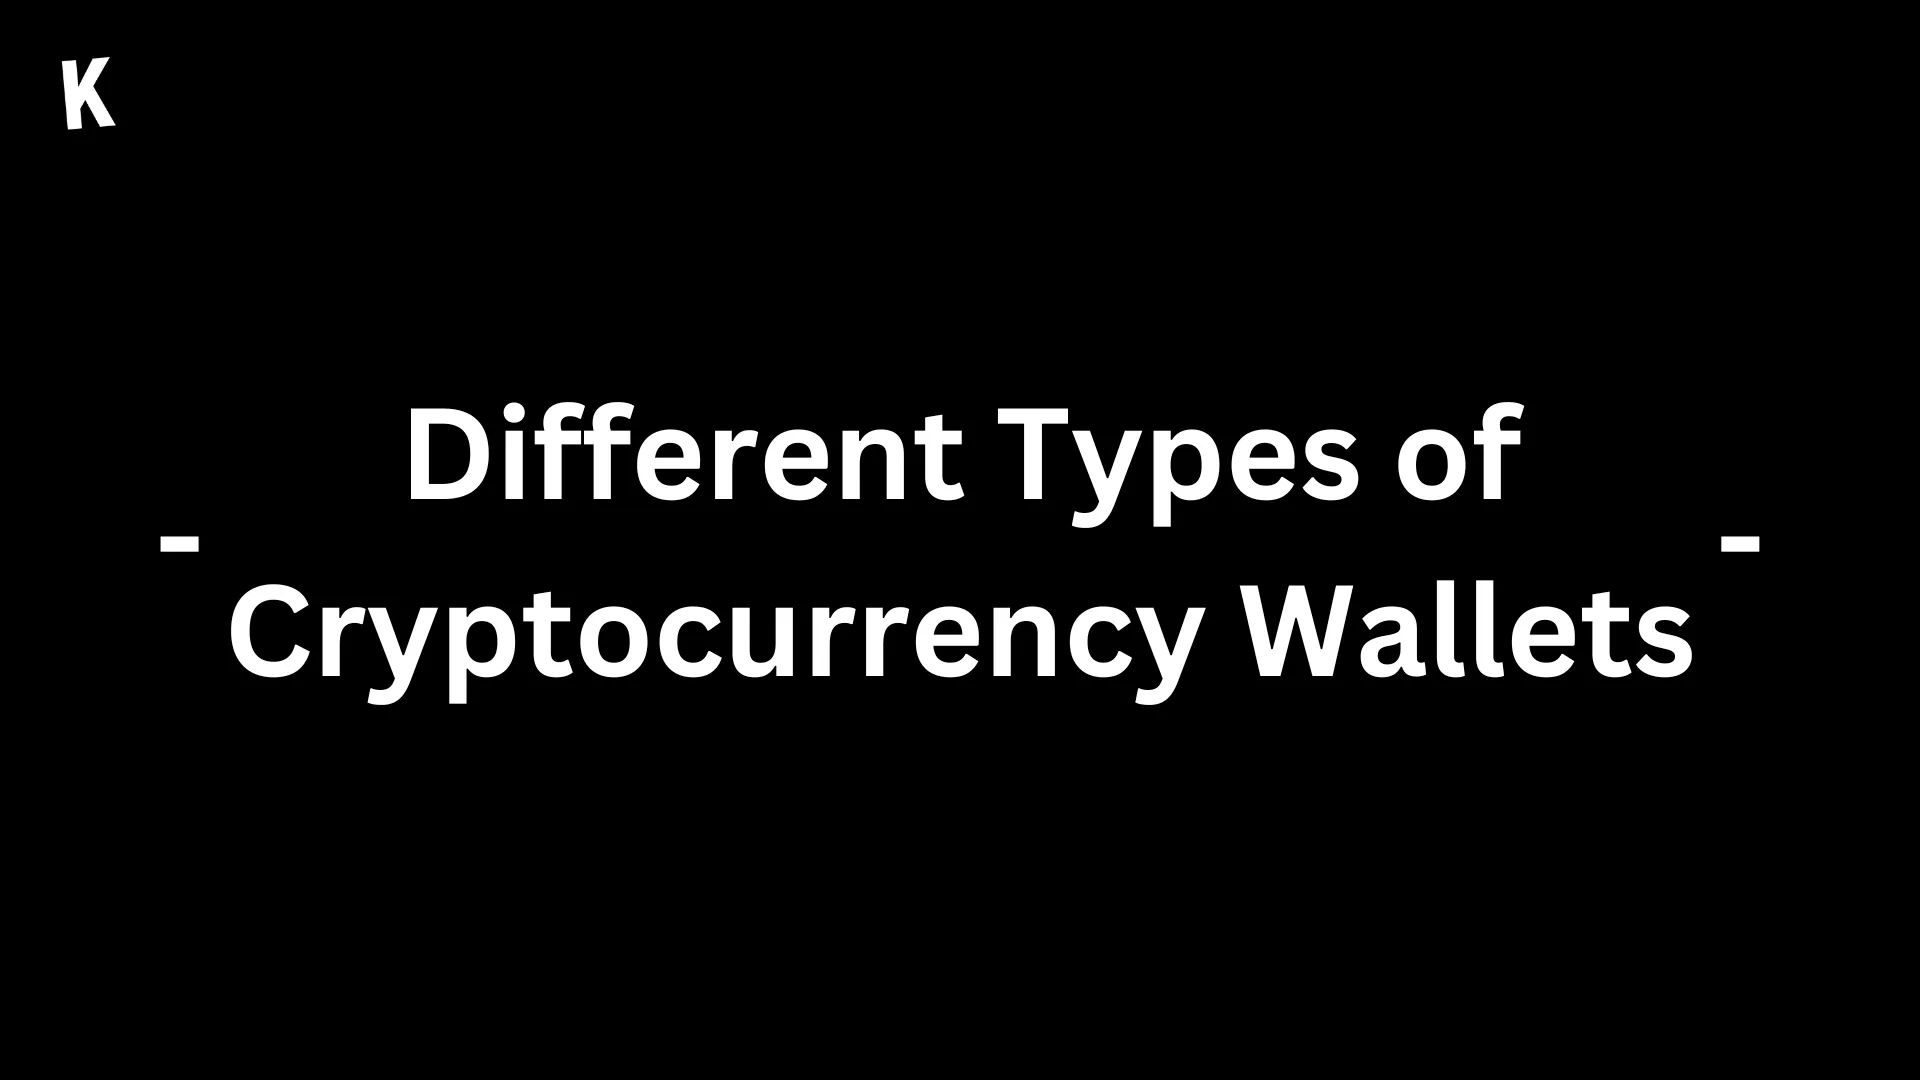 Different Types of Cryptocurrency Wallets